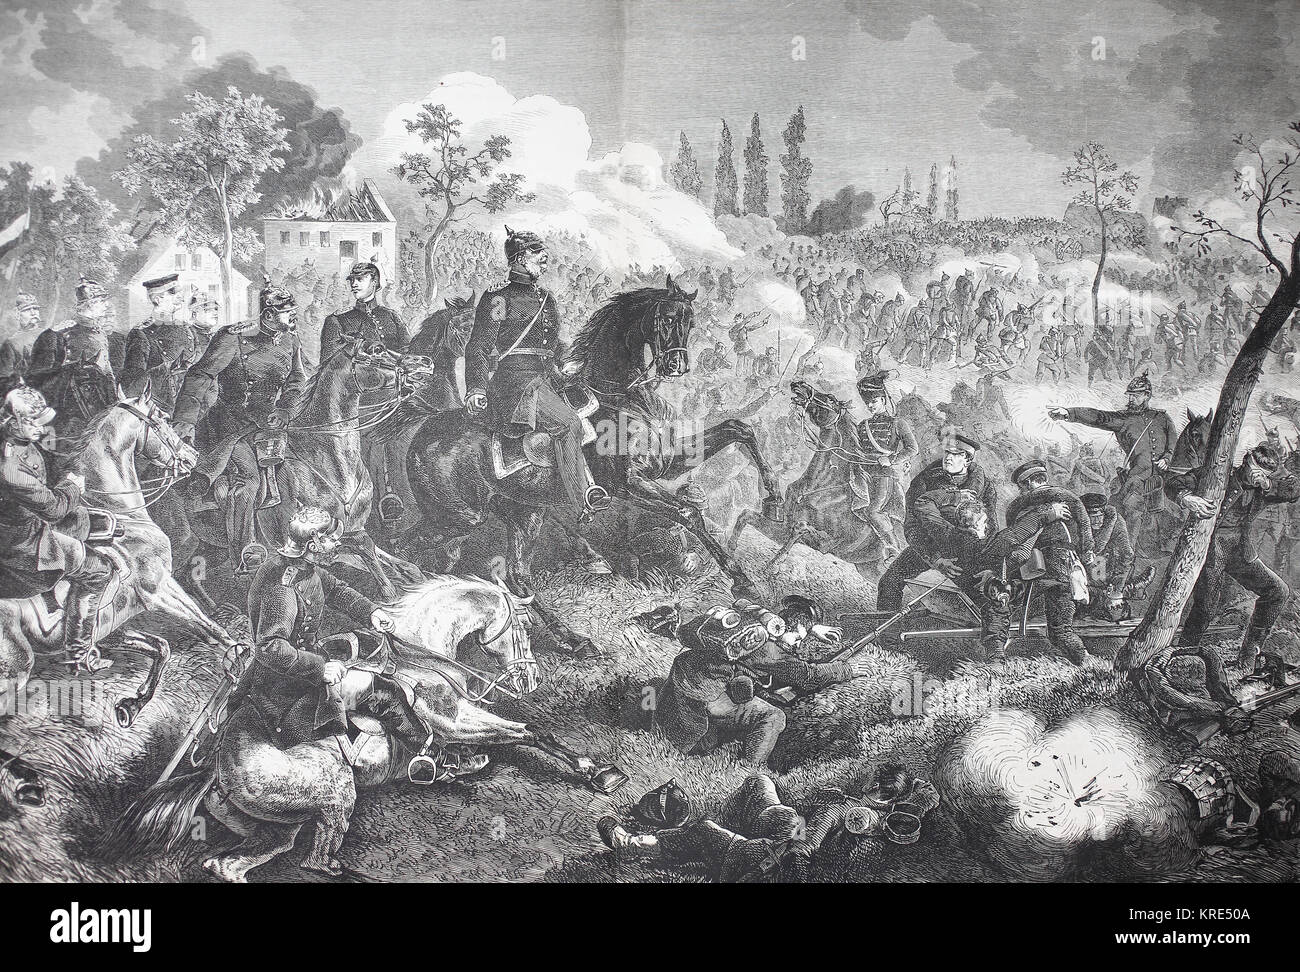 King William in the Battle of Gravelotte, France, on 18 August, in the Franco-German War 1870/1871. The Battle of Gravelotte, or Gravelotte?St. Privat Stock Photo